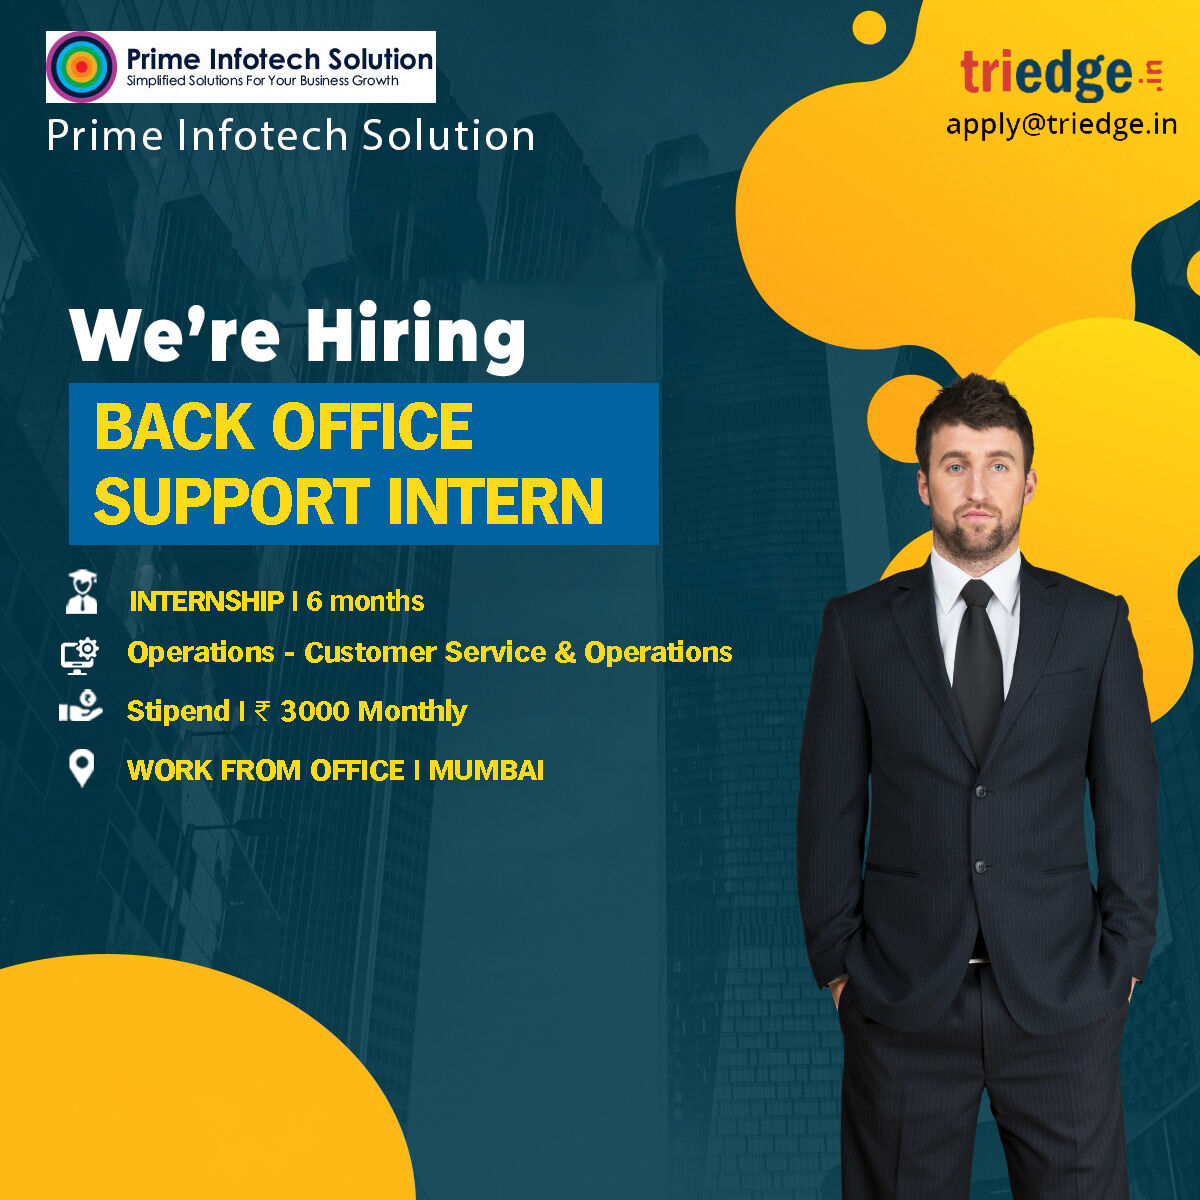 Prime Infotech Solution is providing internship opportunities for the role of back-office support intern. Apply with your resume at apply@triedge.in.
#backofficesupport #operations #customerservice